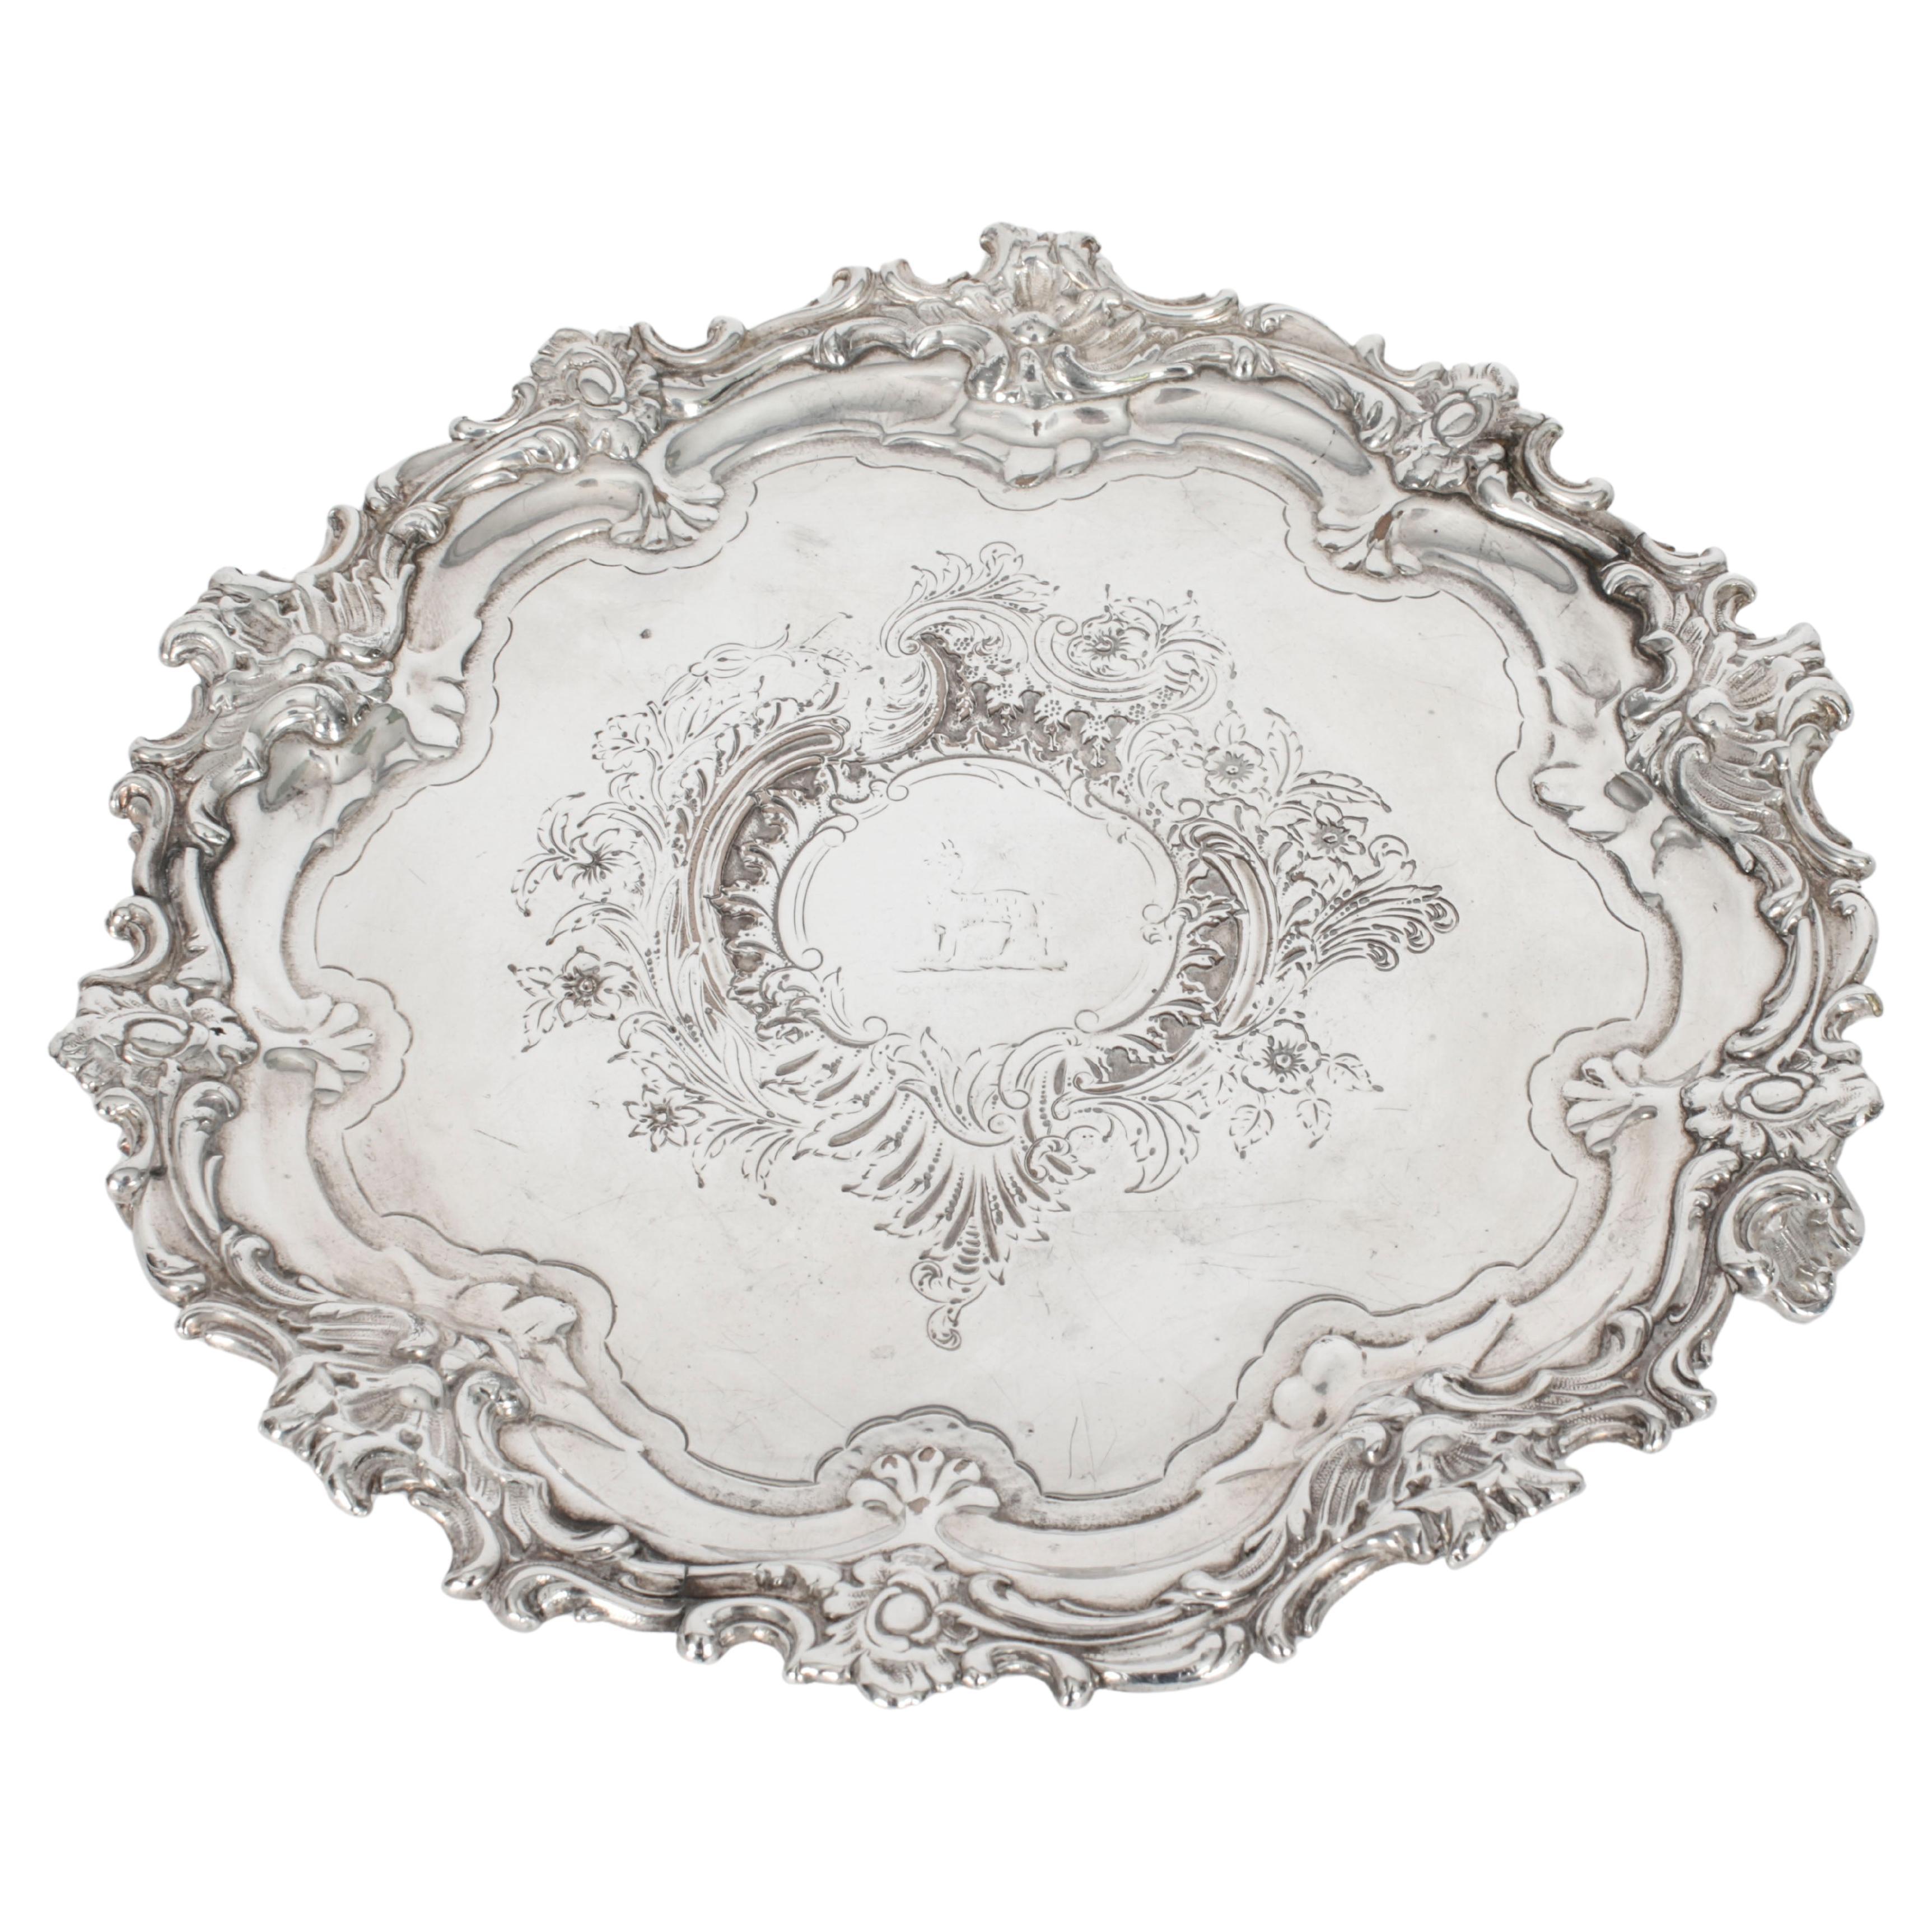 Antique Old Shefield Silver Plated Salver by Smith, Tate, Nicholson 19th Century For Sale